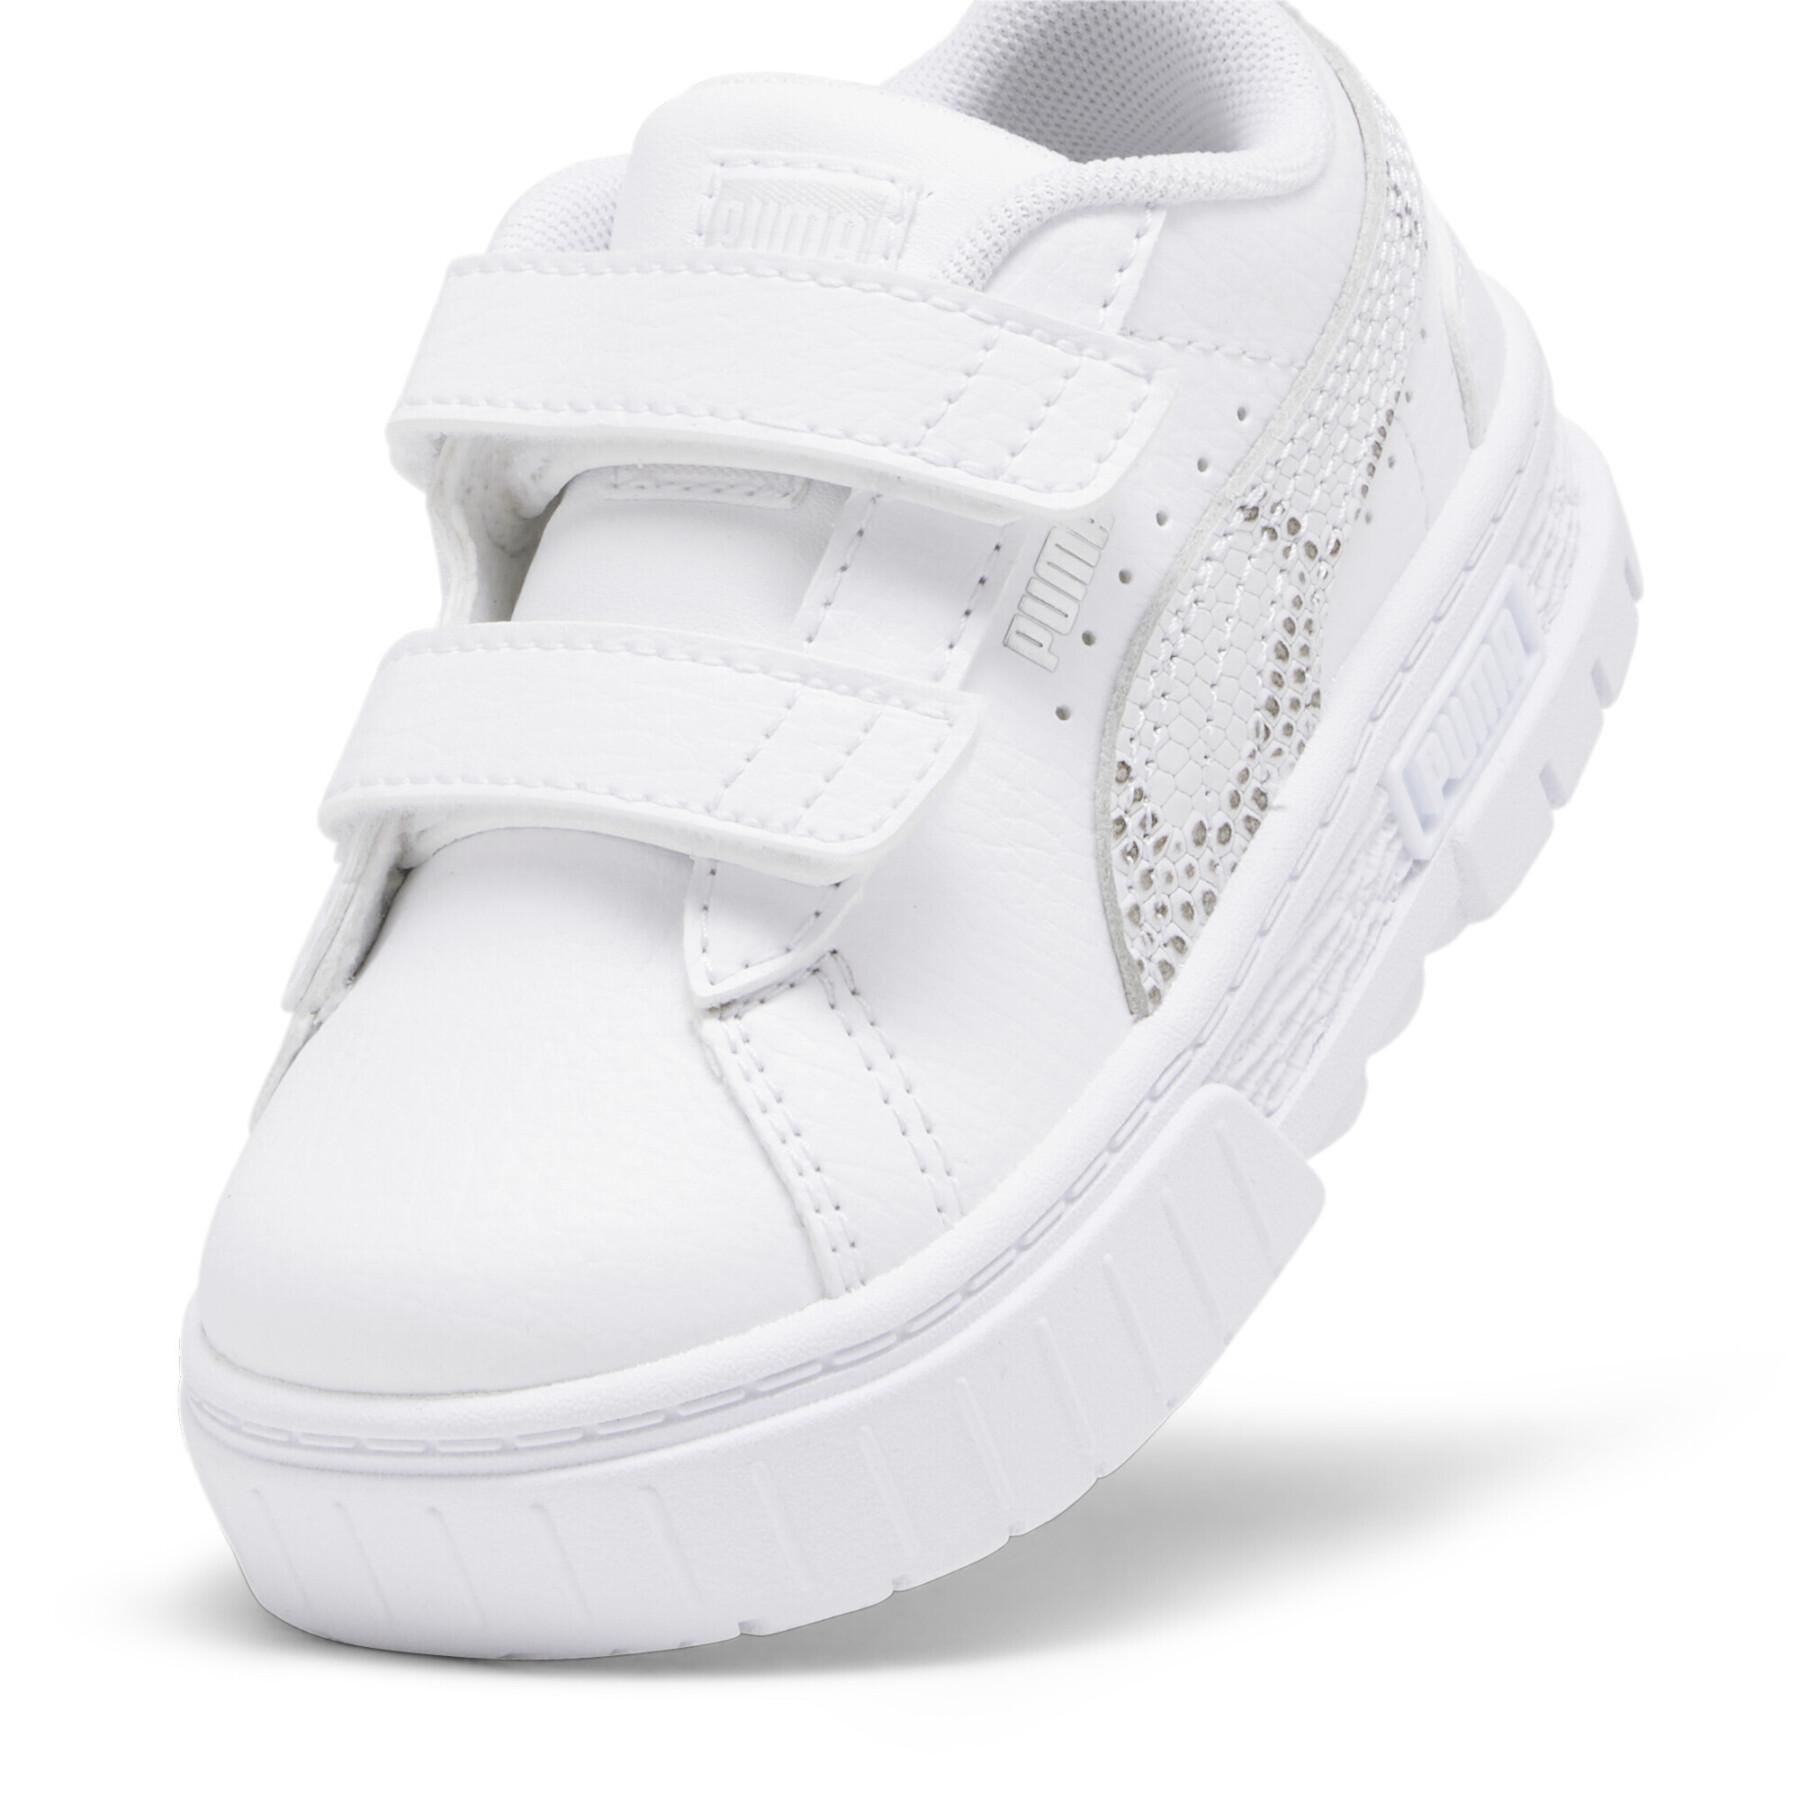 Classic White Puma Velcro Leather Trainers for Men